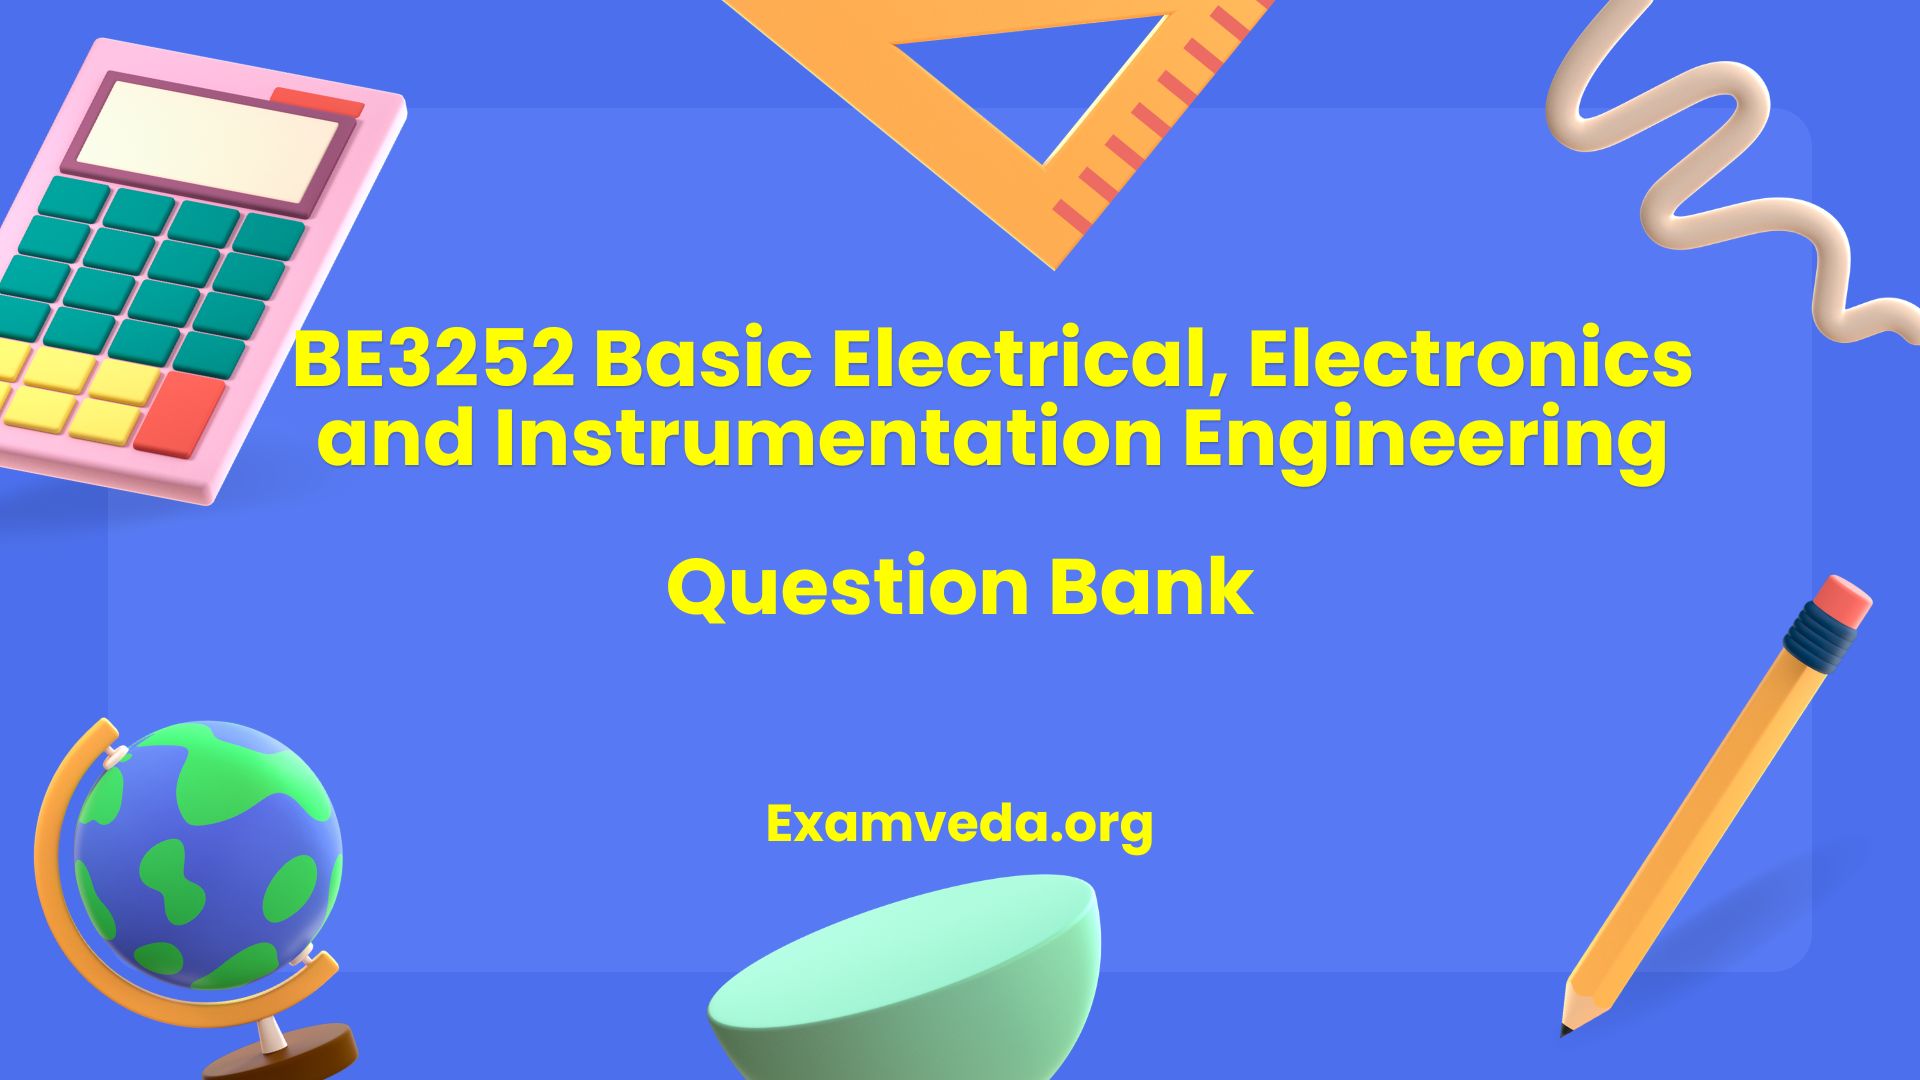 BE3252 Basic Electrical, Electronics and Instrumentation Engineering Question Bank